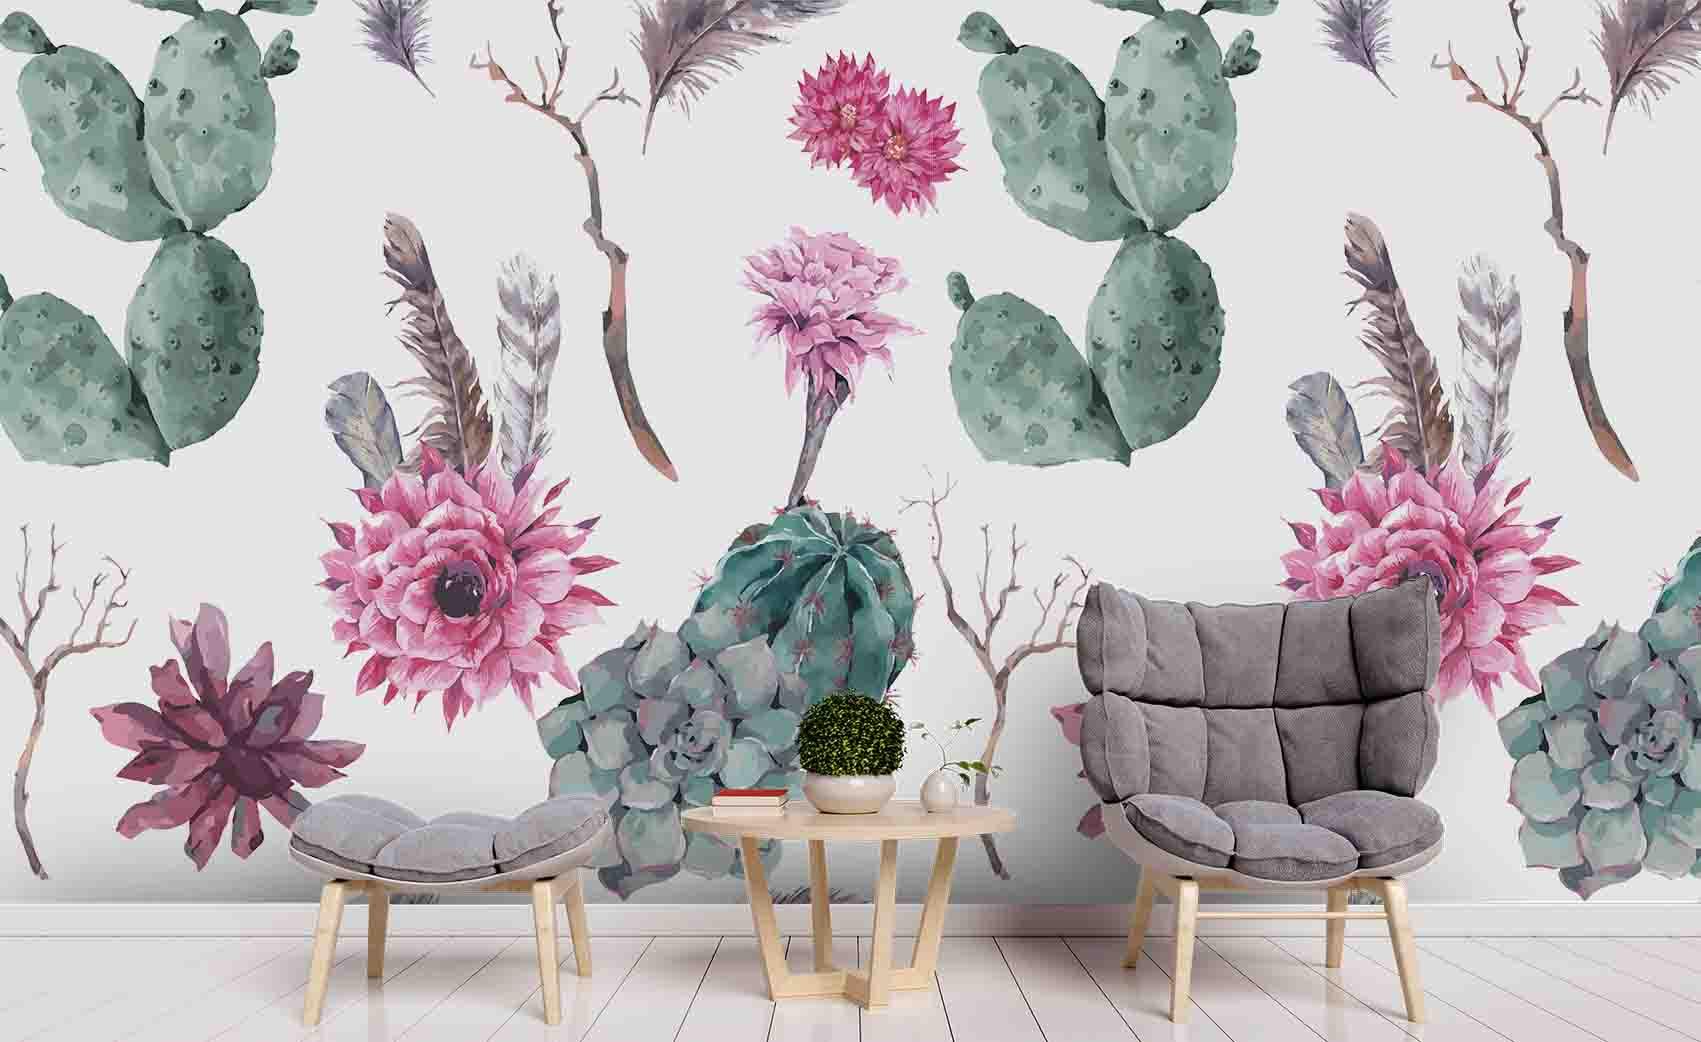 3D Cactus Flowers Feather Wall Mural Wallpaper SF39- Jess Art Decoration